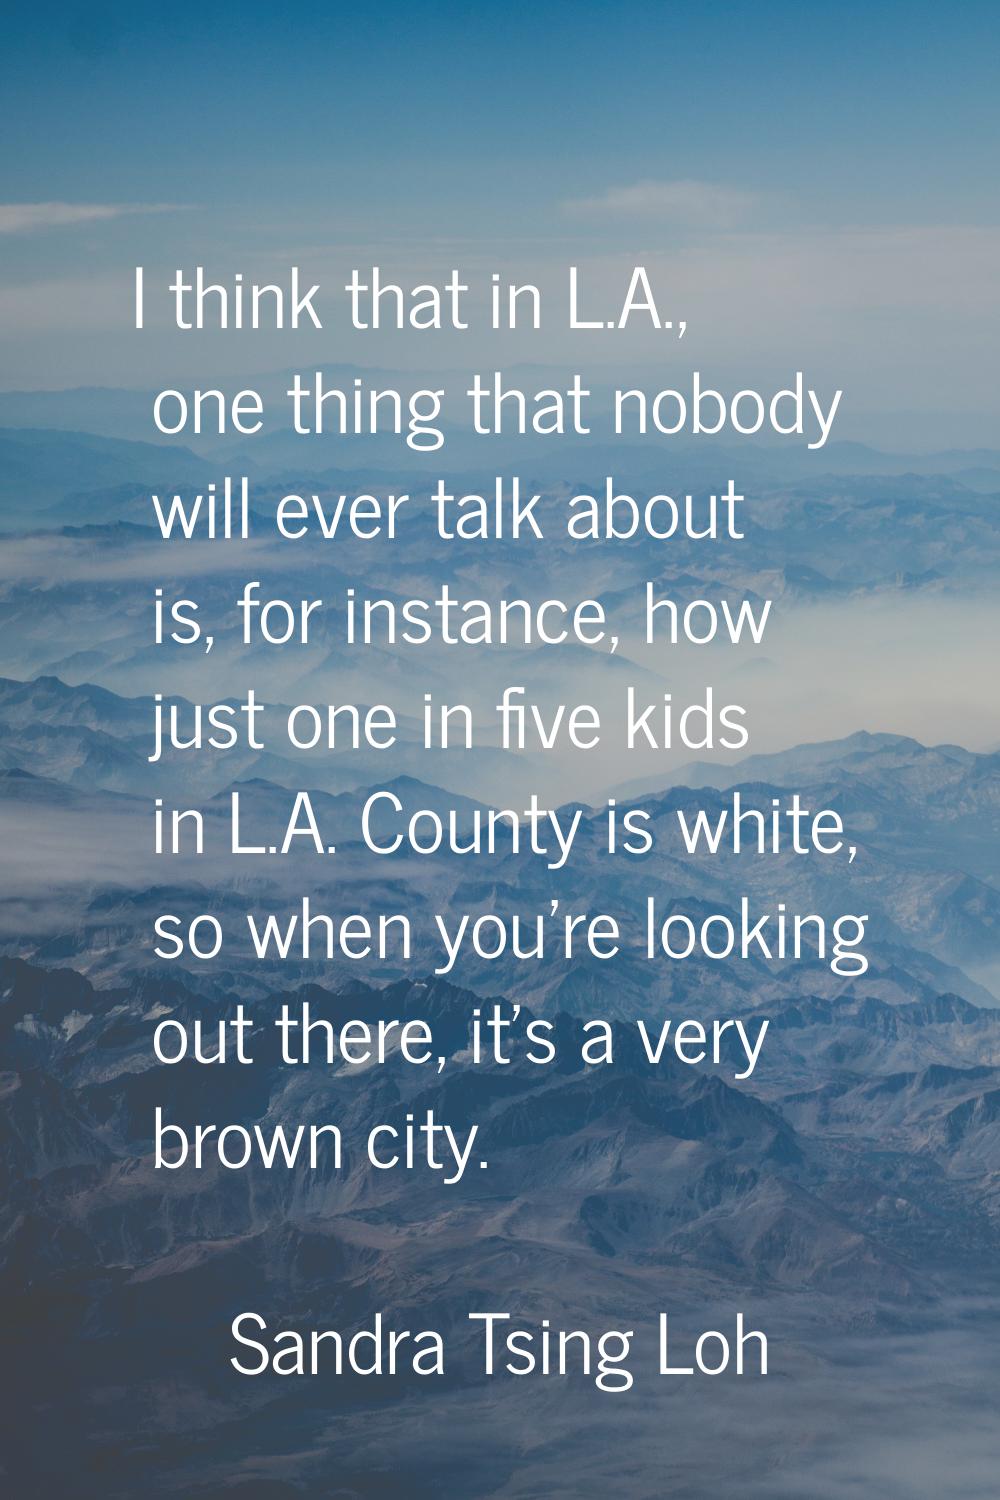 I think that in L.A., one thing that nobody will ever talk about is, for instance, how just one in 